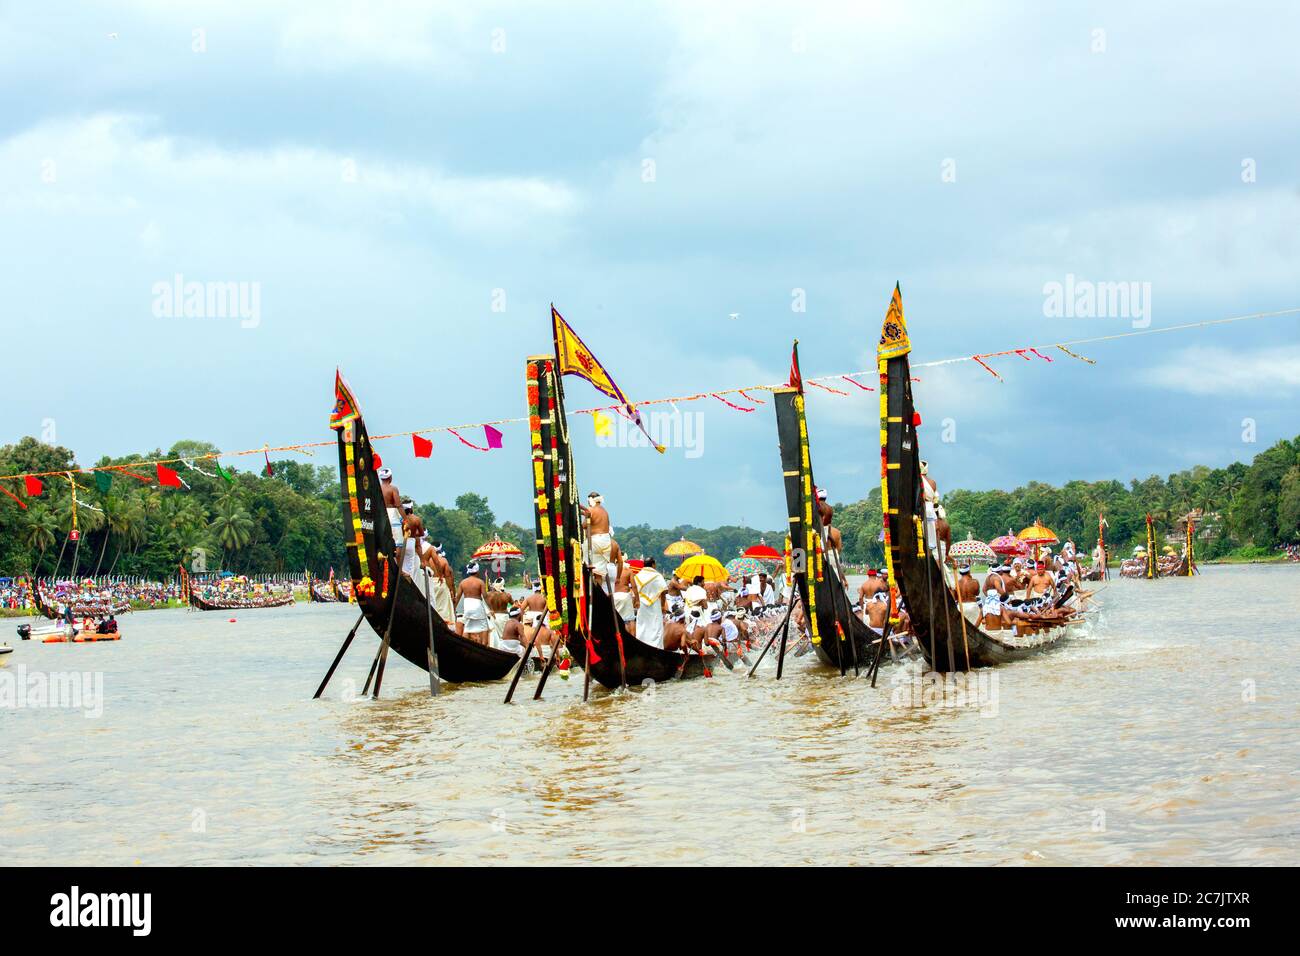 decorated boats also called palliyodam and rowers from Aranmula Boat Race,the oldest river boat fiesta in Kerala,Aranmula,India,pradeep subramanian Stock Photo